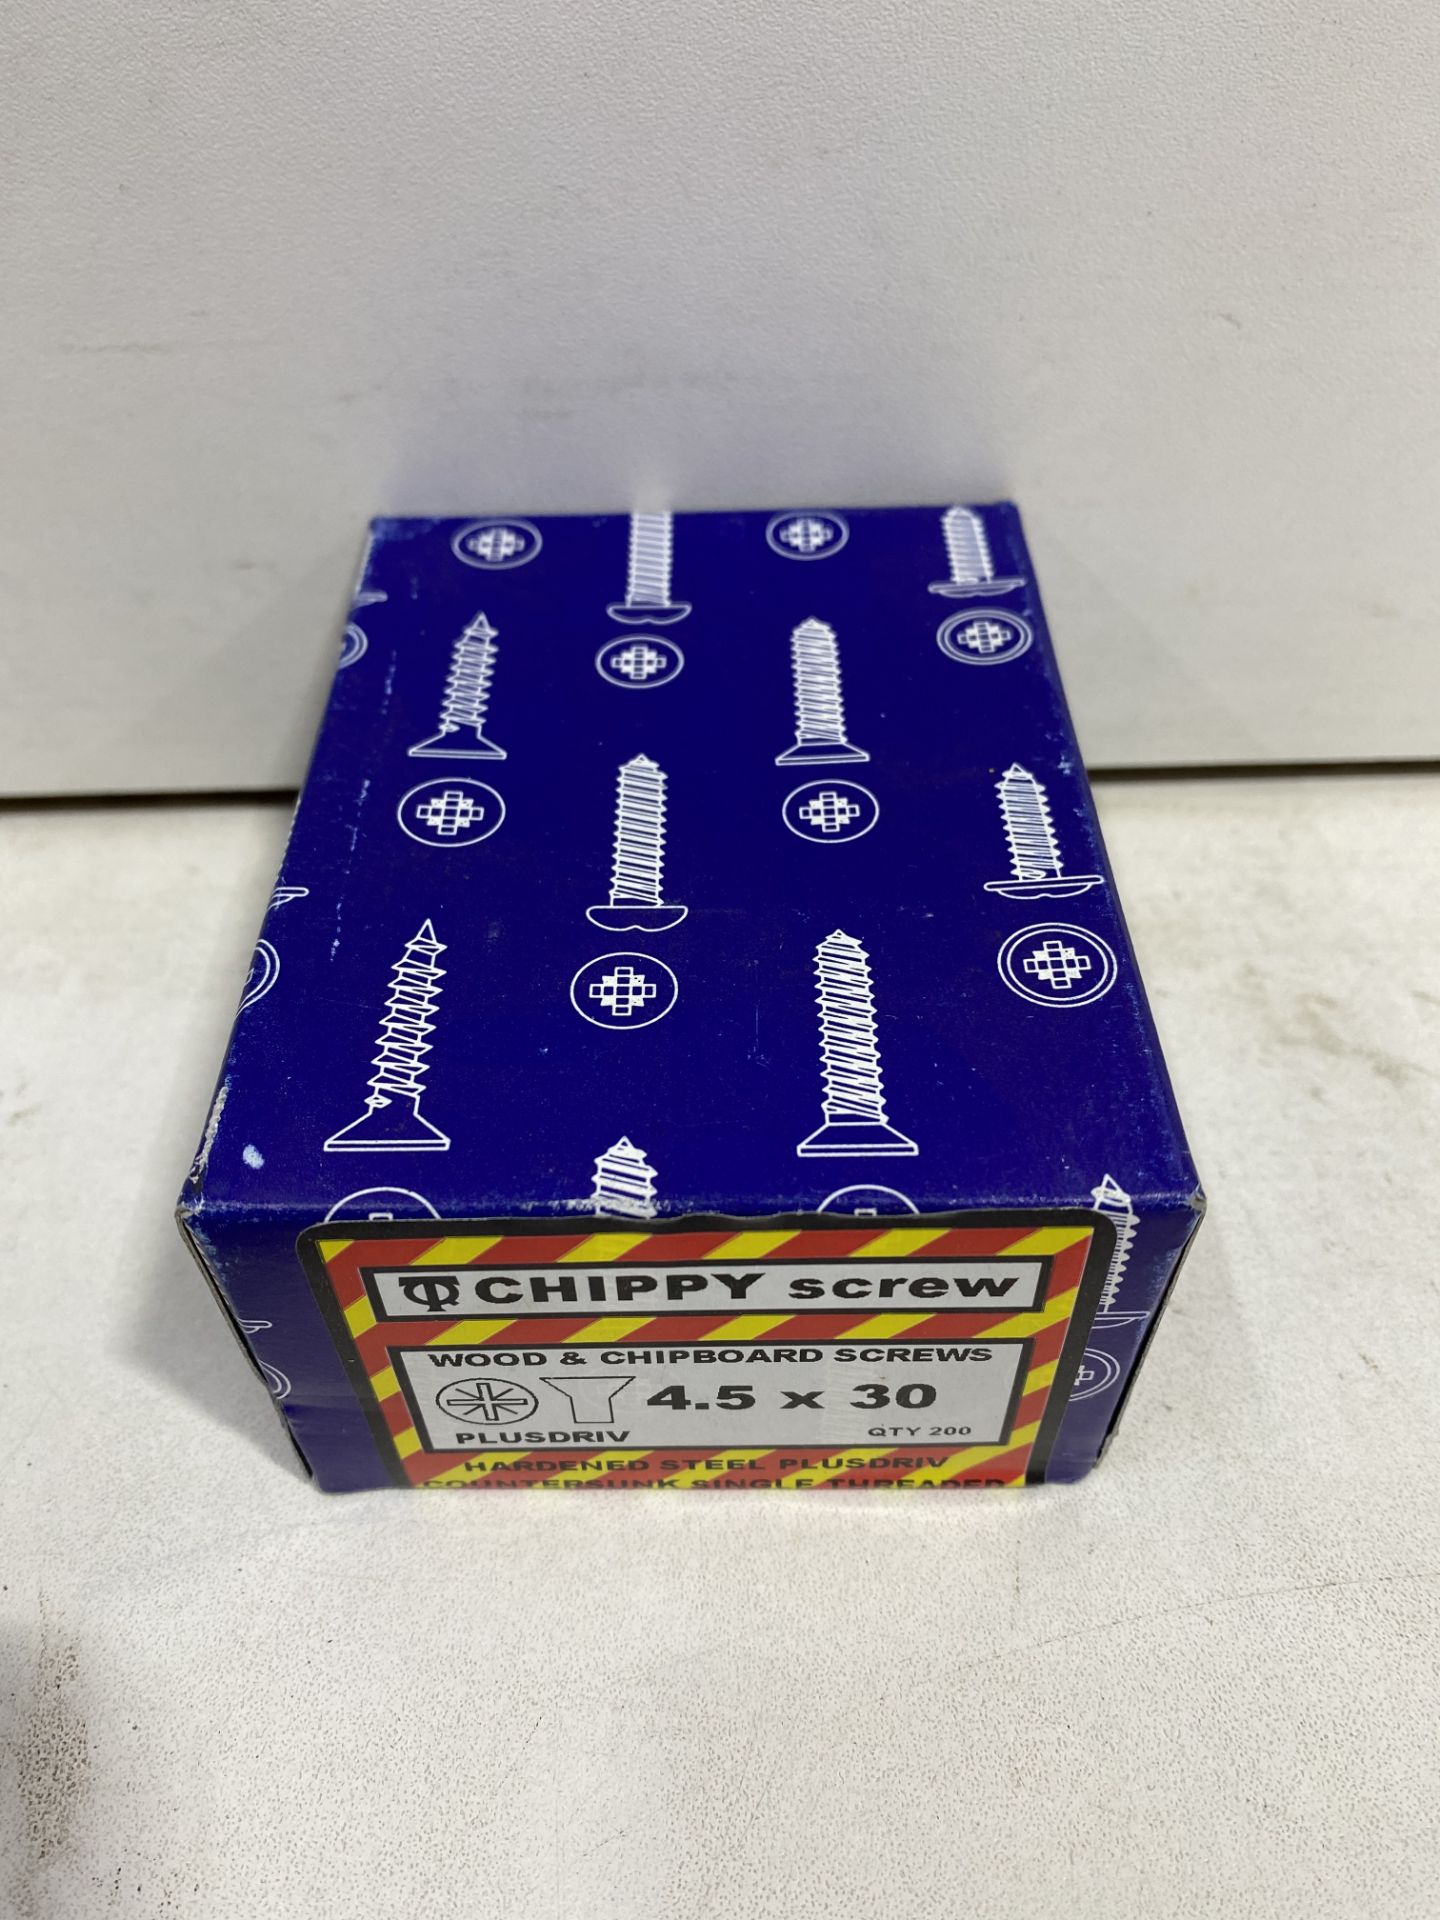 8 x Various Boxes Of Chippy Screw Wood & Chipboard Screws - Image 3 of 9